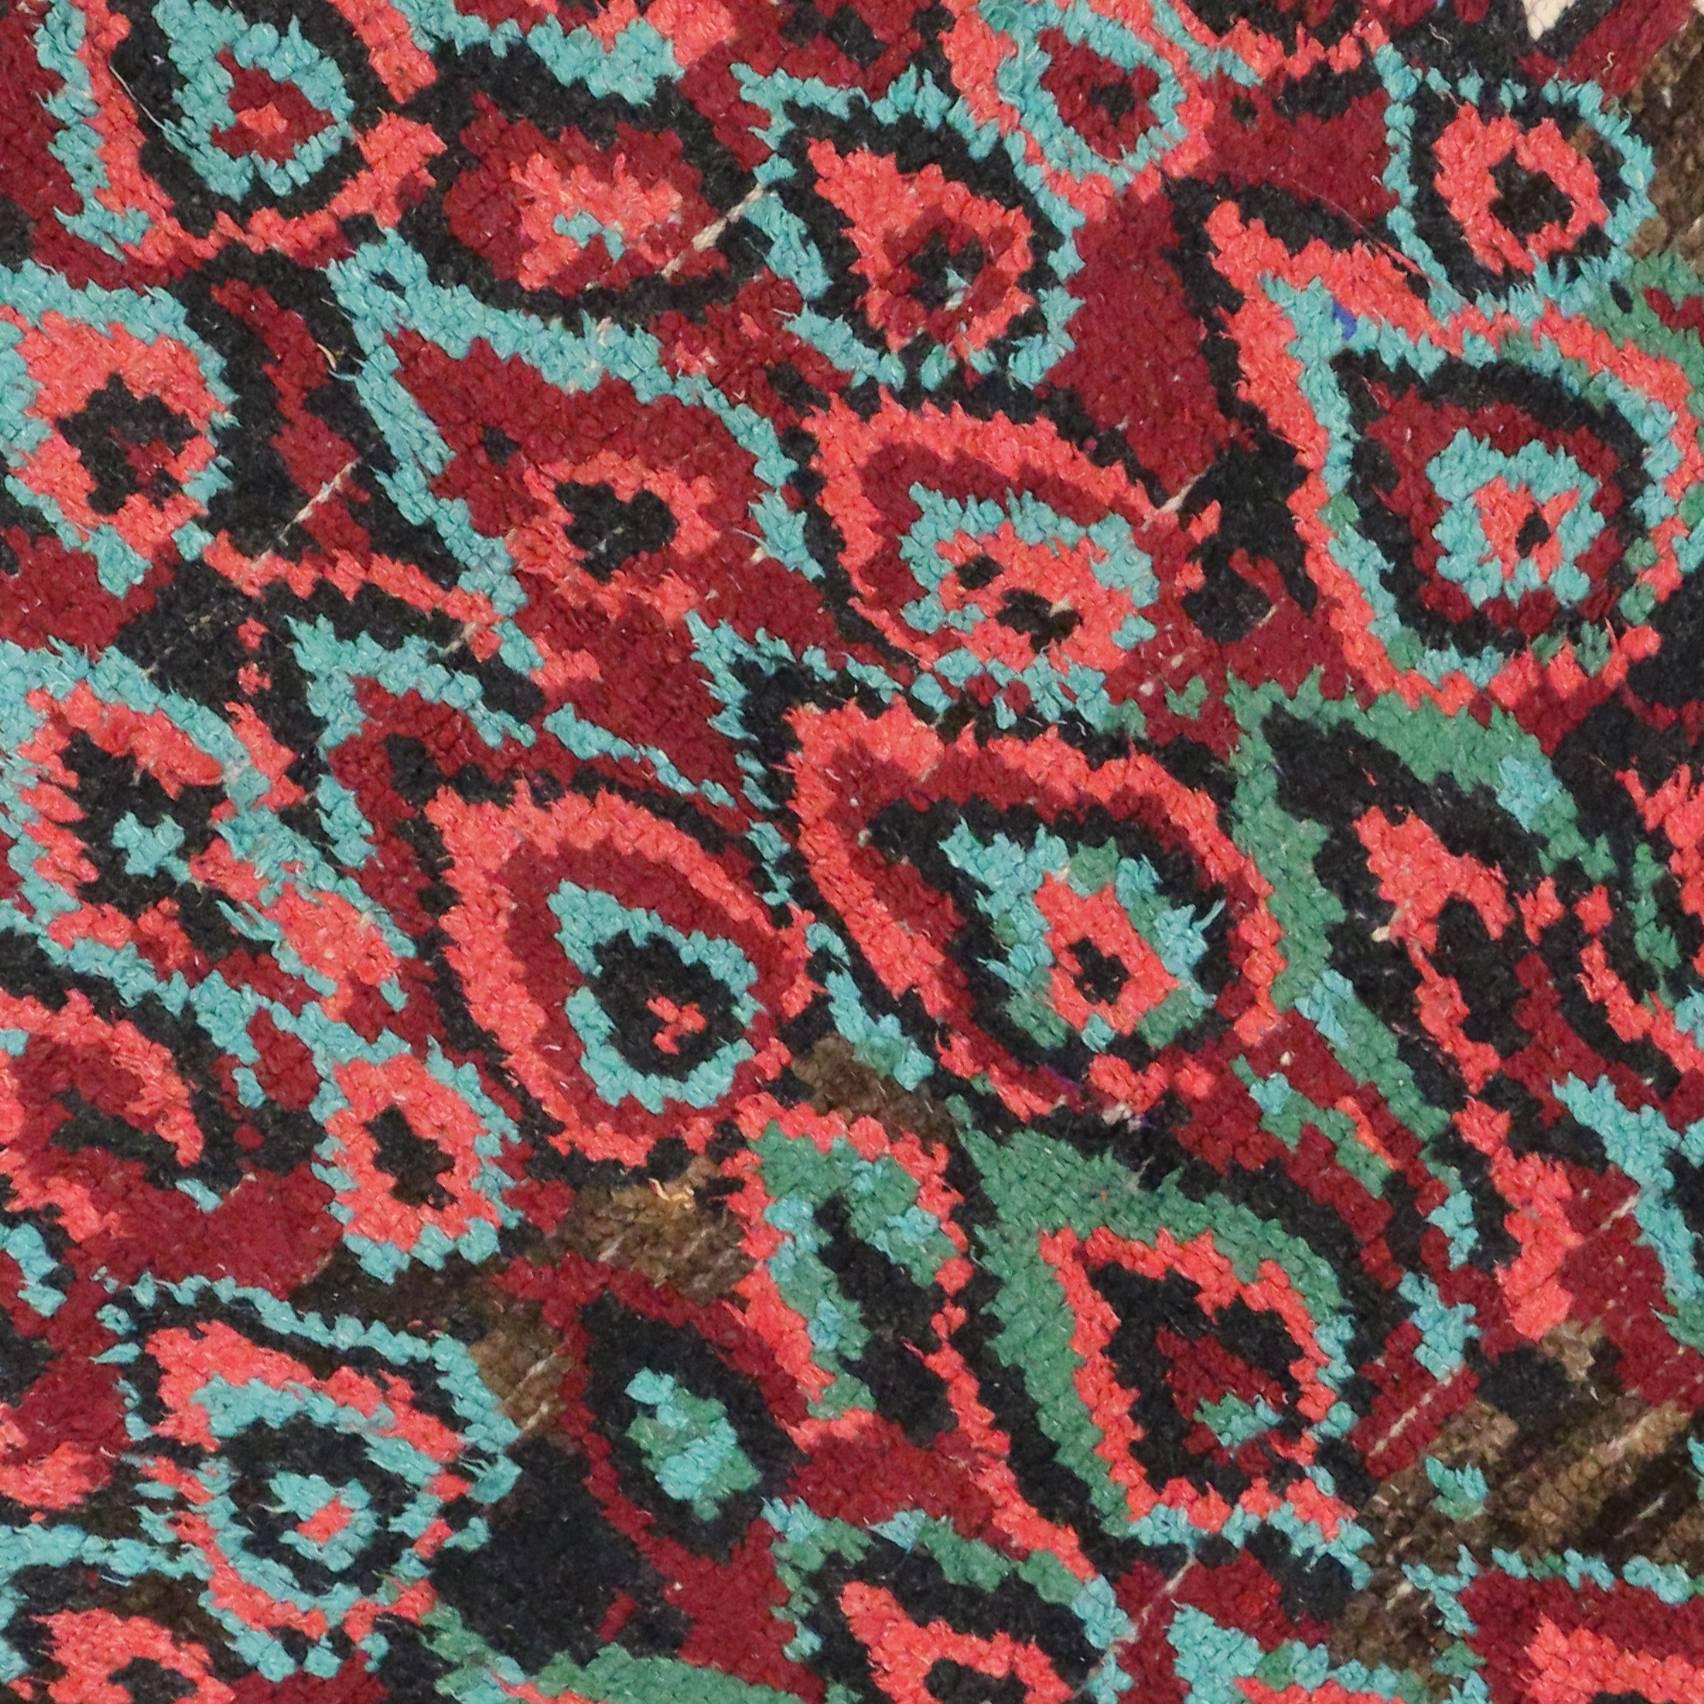 Vintage Berber Moroccan Rug with Post-Modern Memphis Style In Good Condition For Sale In Dallas, TX